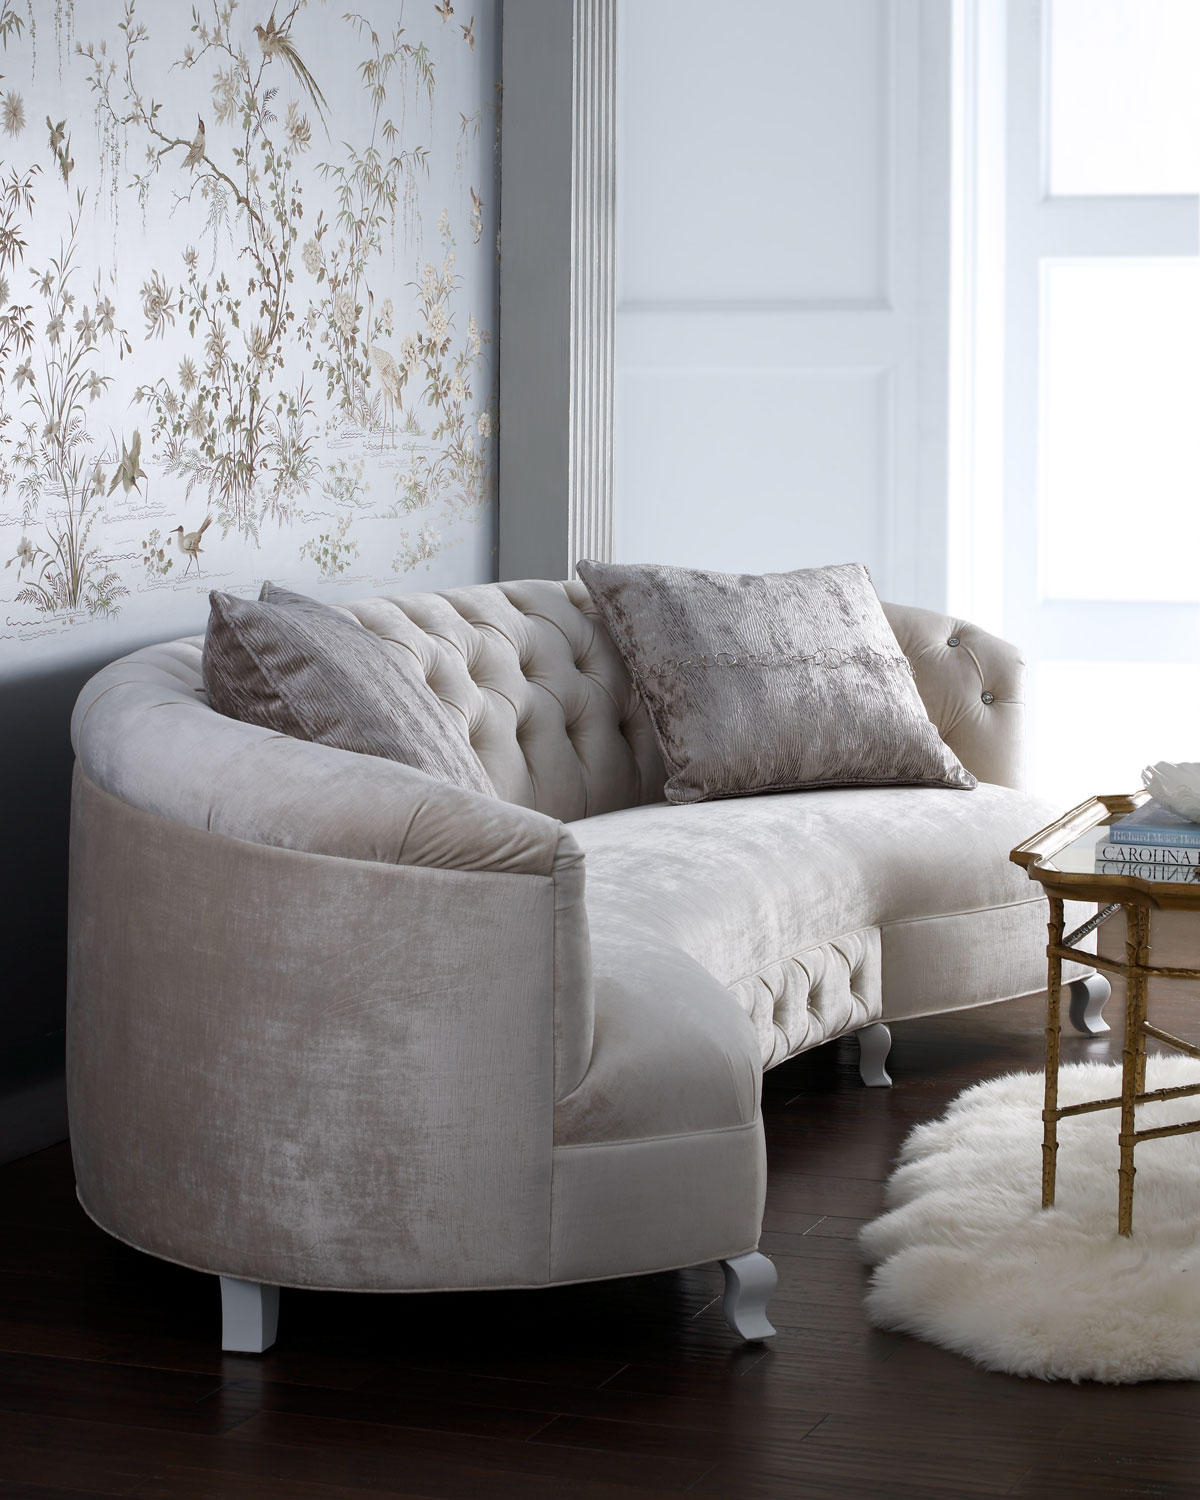 Tufted white couch